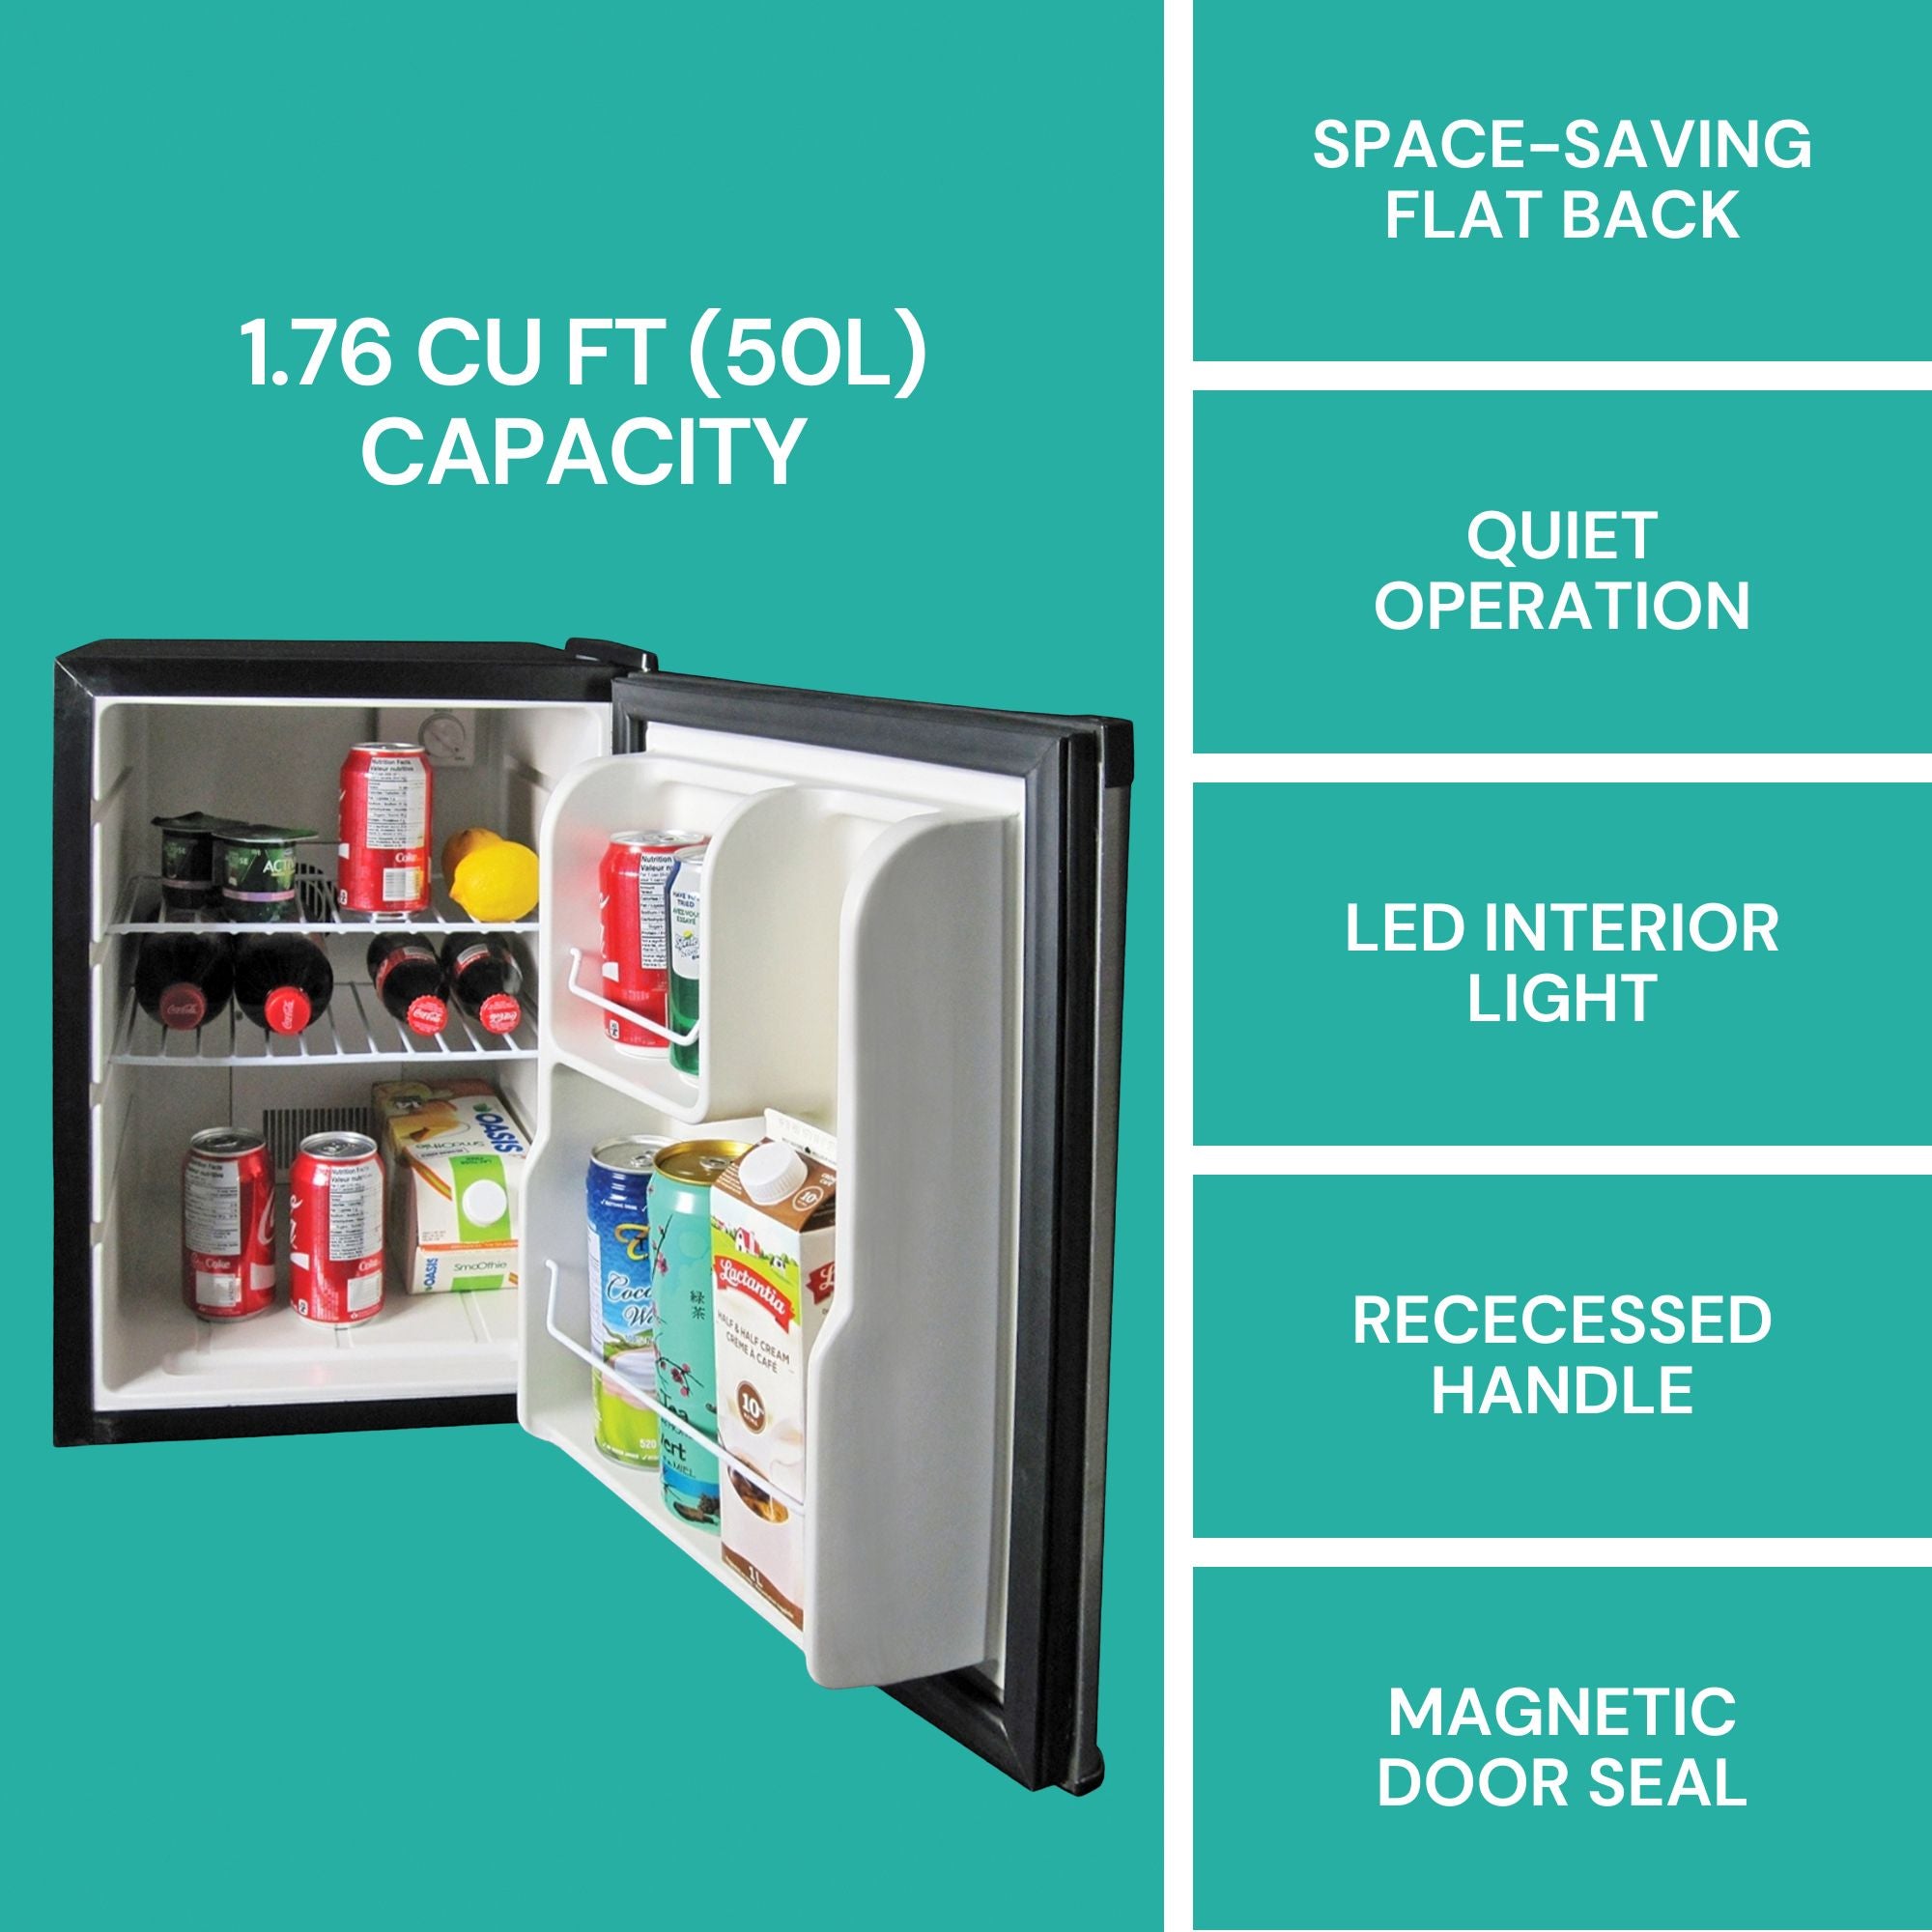 Compact fridge, open and filled with food and drinks, on an aqua background with text above reading, "1.76 cu ft (50L) capacity." Icons and text to the right describe features: Space-saving flat back; quiet operation; LED interior light; recessed handle; magnetic door seal